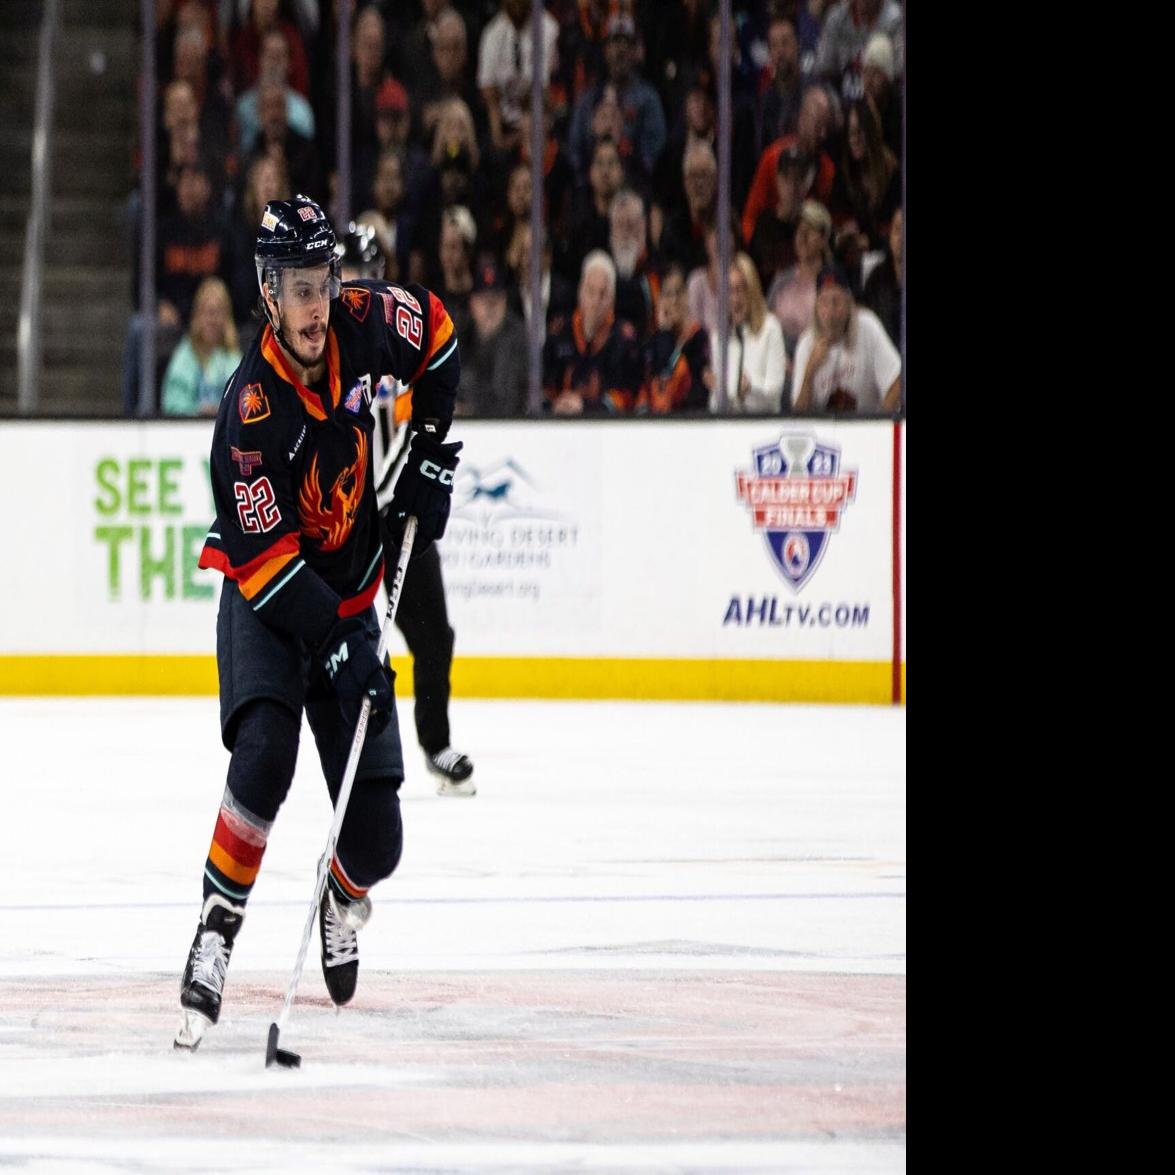 First Two Players Skate Onto Roster For Coachella Valley Firebirds